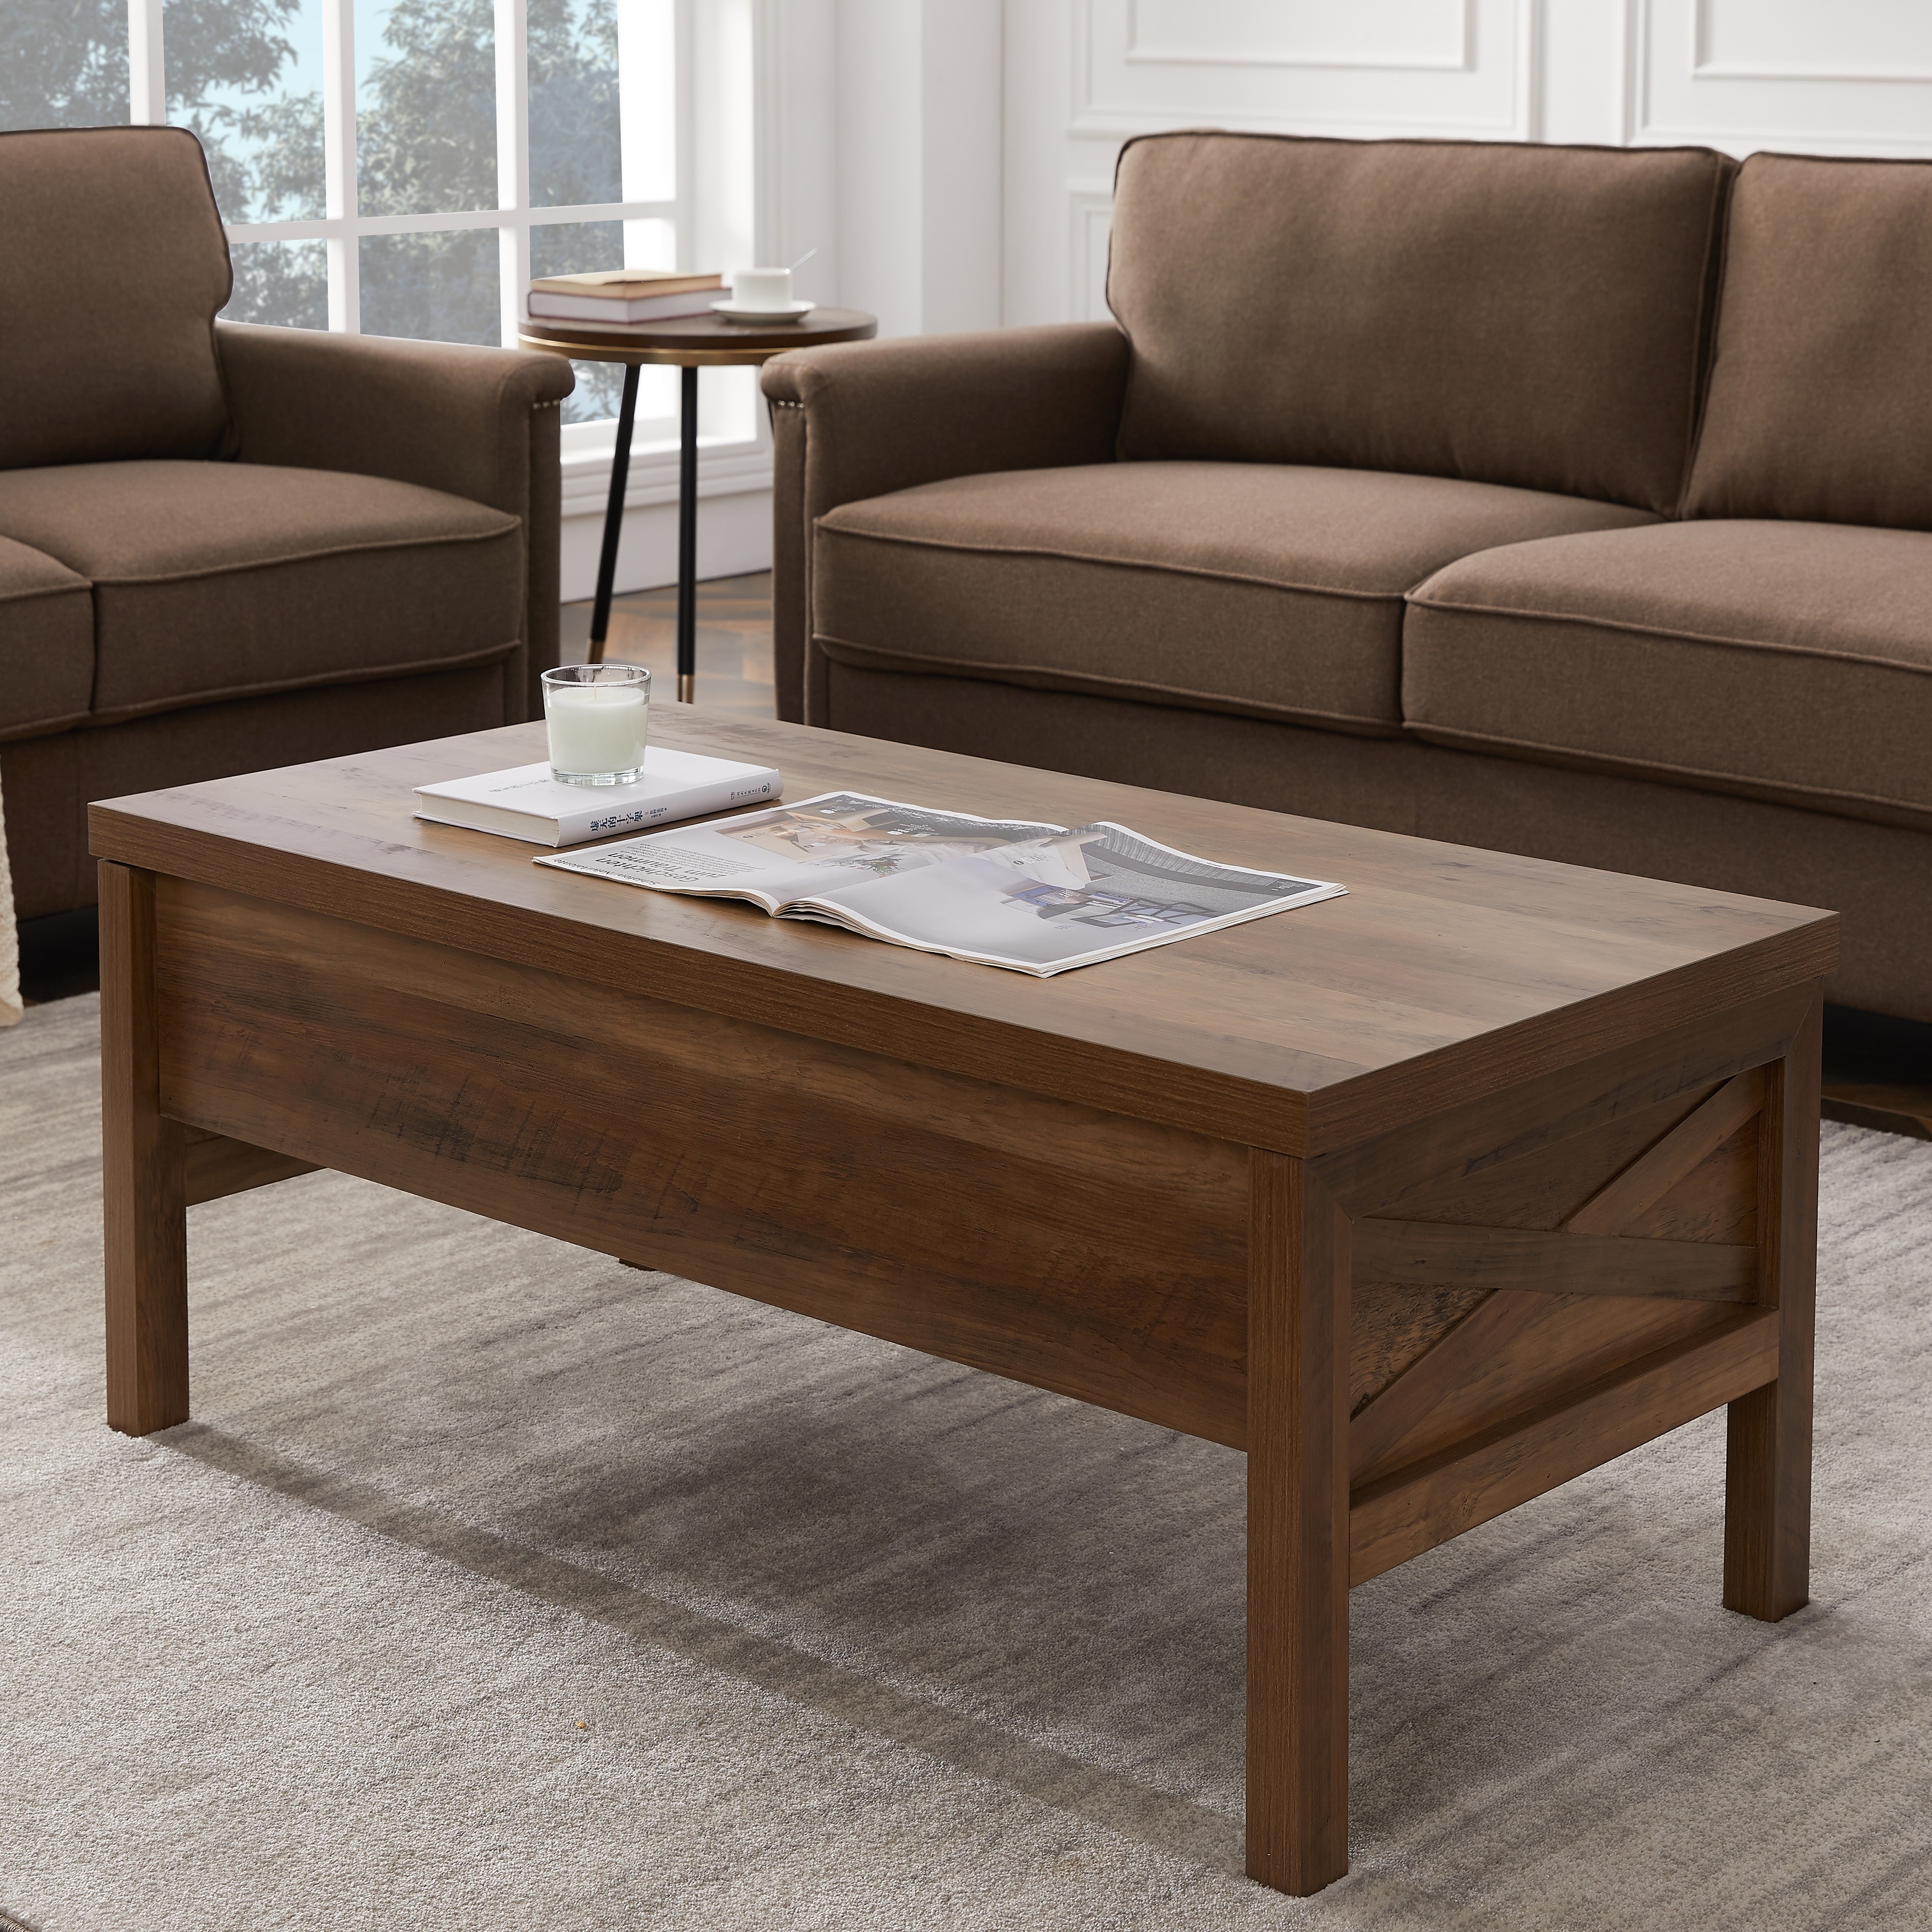 https://ak1.ostkcdn.com/images/products/is/images/direct/ed2be8a387833cbe53c7c5355761149b6b668939/Lift-Coffee-Table-Adjustable-Modern-Coffee-Table-Sofa-Table-With-Hidden-Compartment-And-Living-Room-Storage.jpg